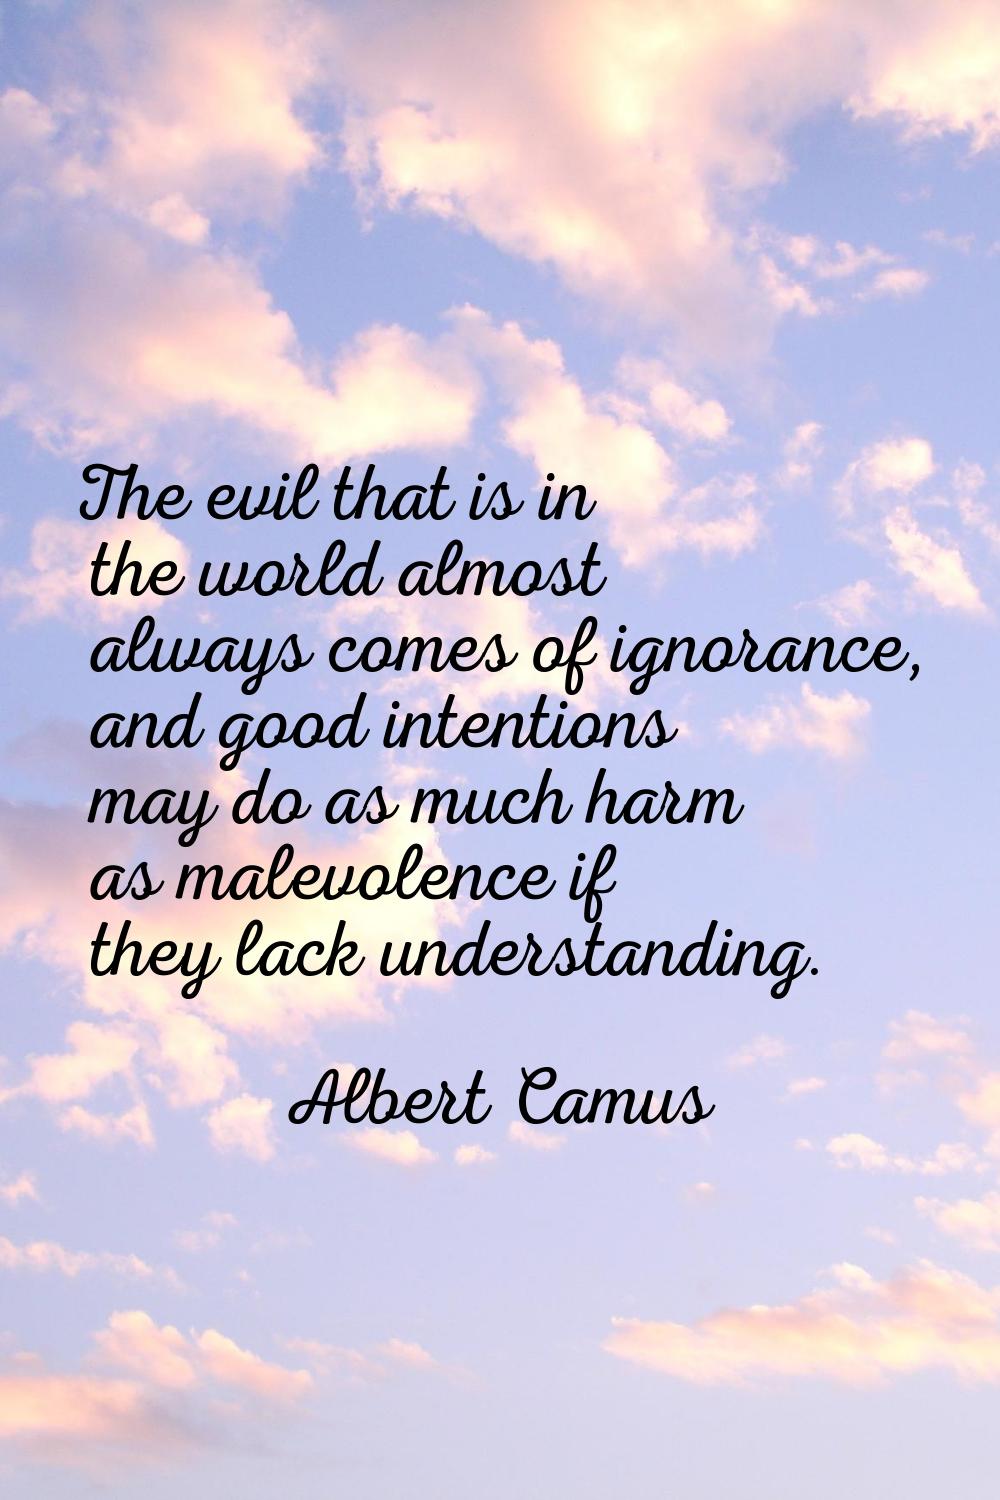 The evil that is in the world almost always comes of ignorance, and good intentions may do as much 